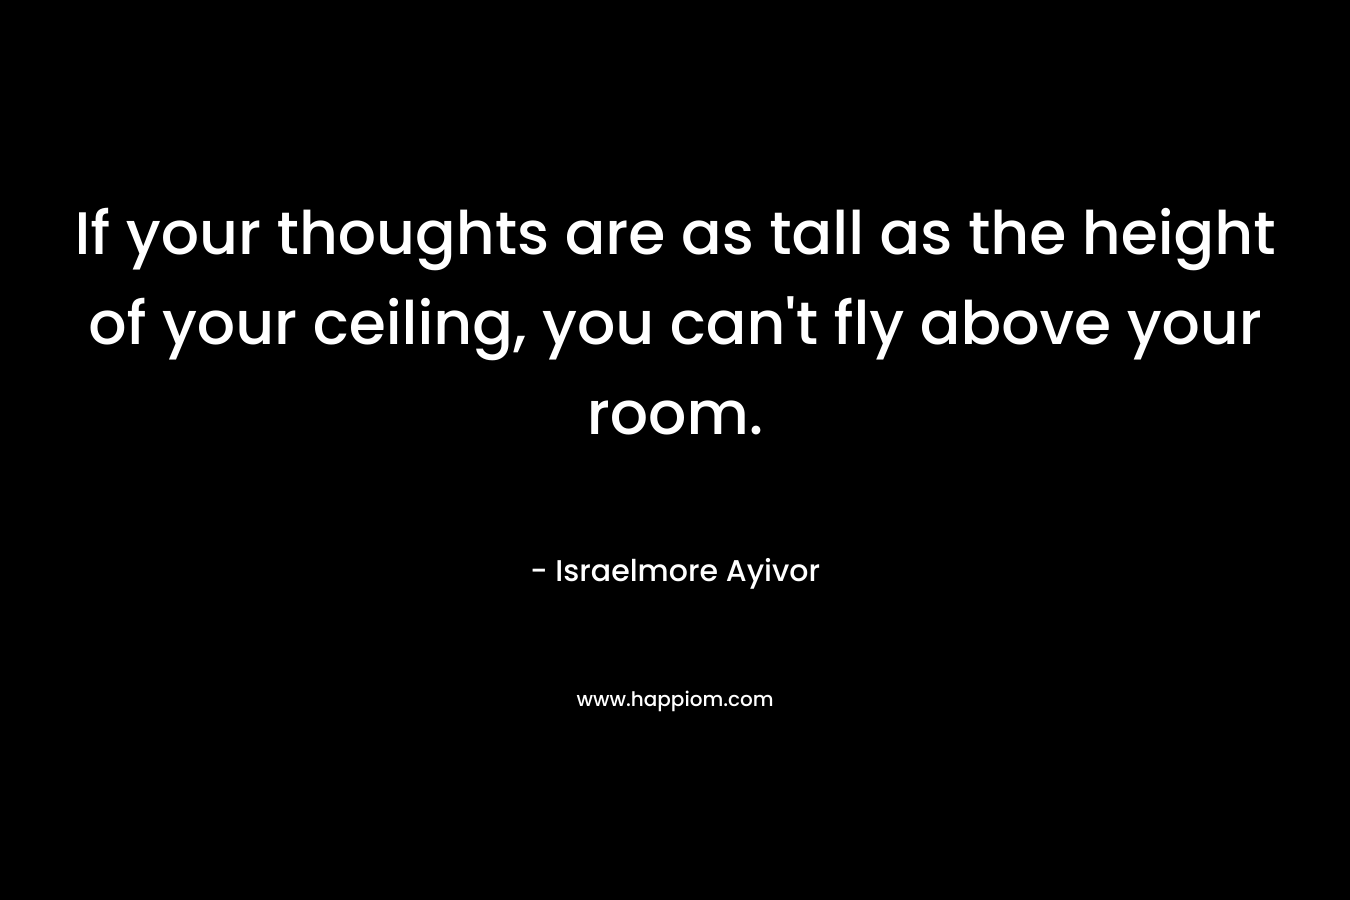 If your thoughts are as tall as the height of your ceiling, you can’t fly above your room. – Israelmore Ayivor